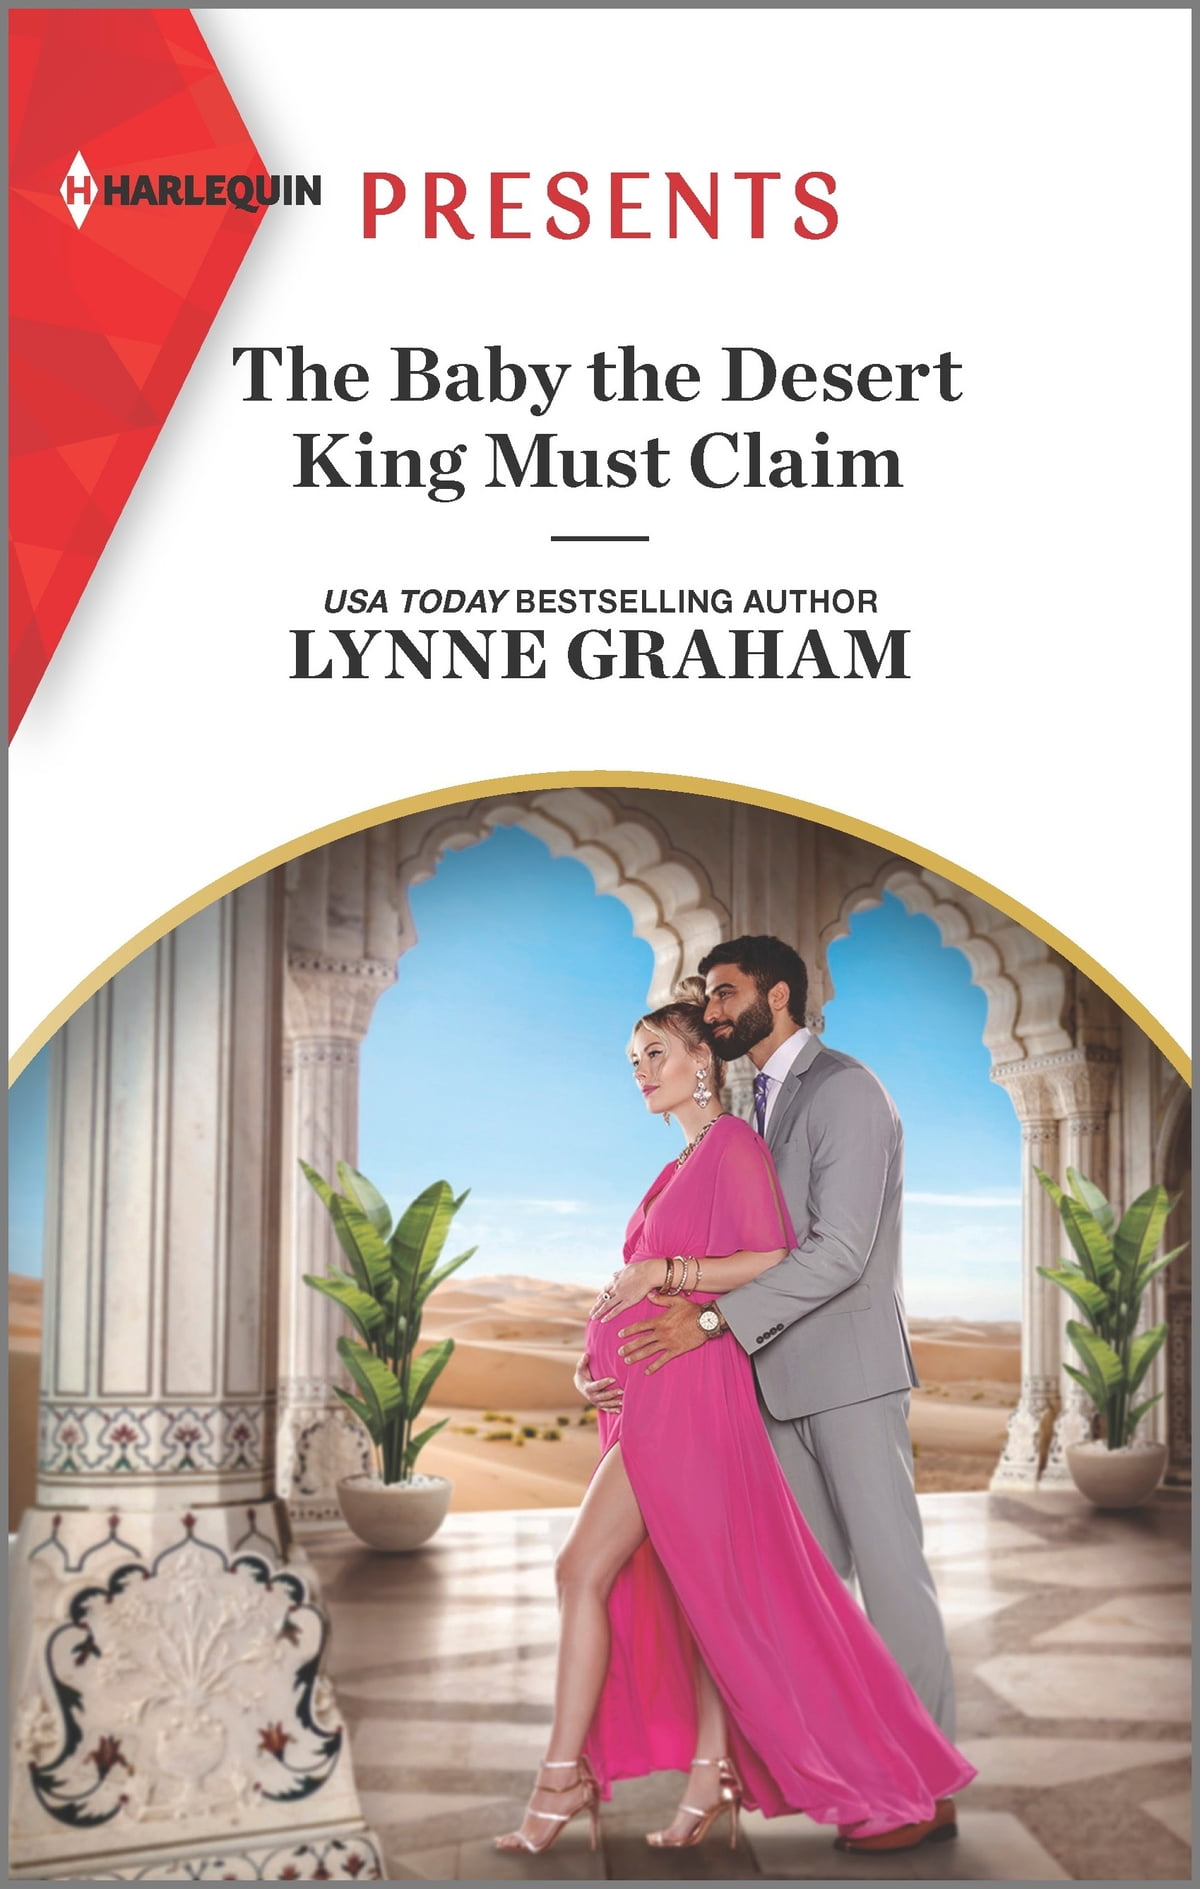 The Baby the Desert King Must Claim by Lynne Graham PDF Download